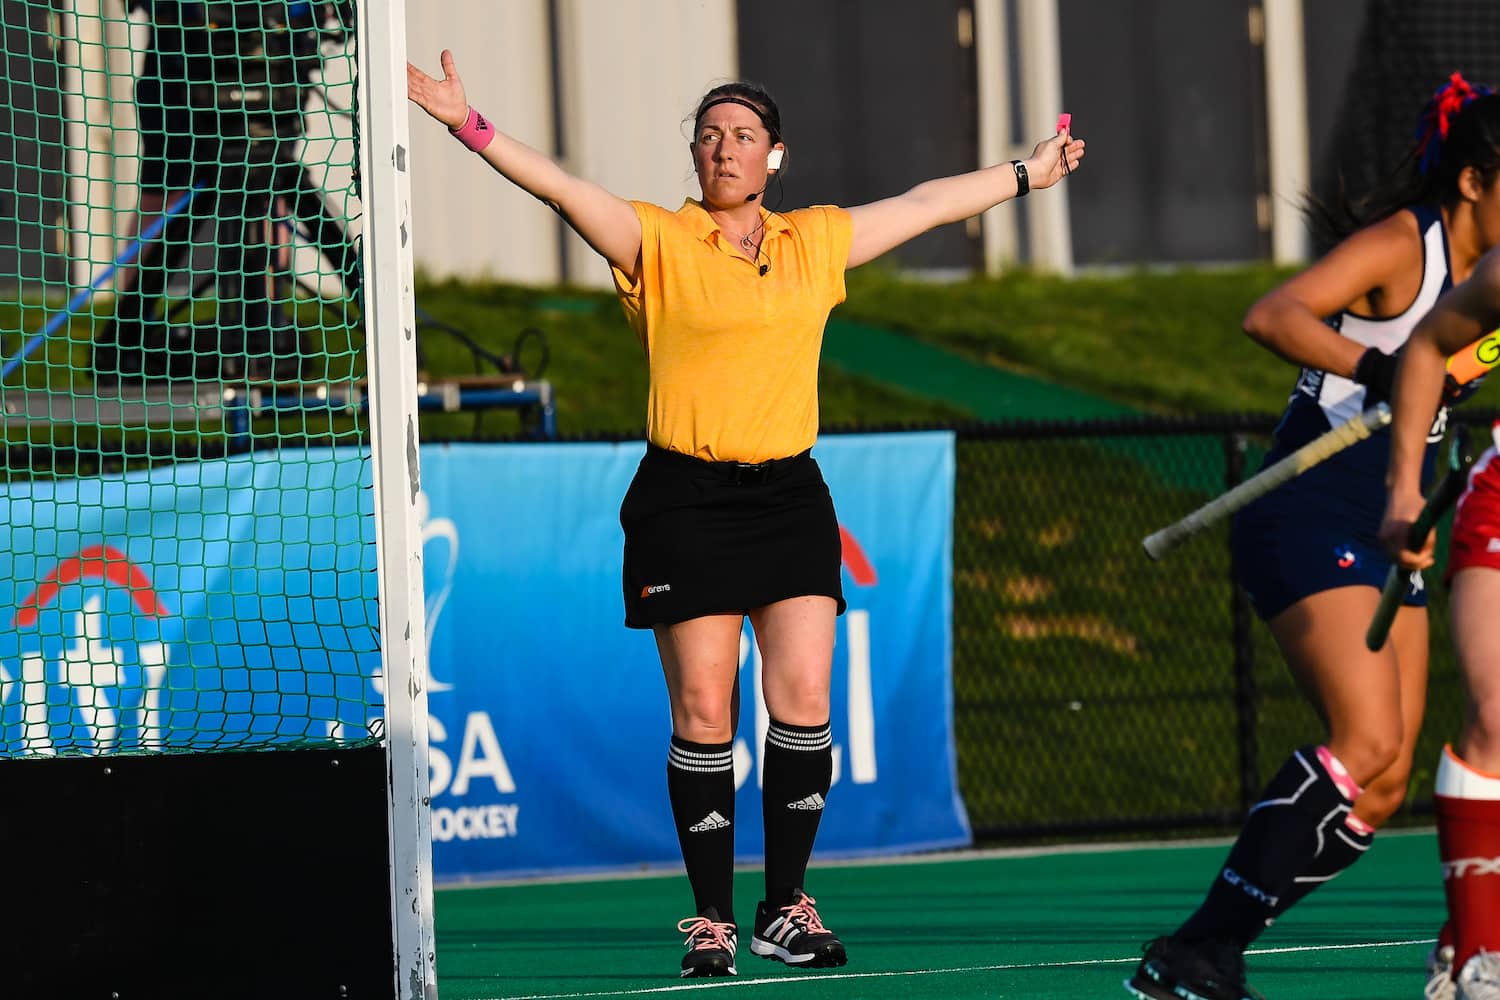 USA Umpire Suzi Sutton officiates a game during the 2018 U.S. Women's National Team against Chile test series in Lancaster, Pennsylvania